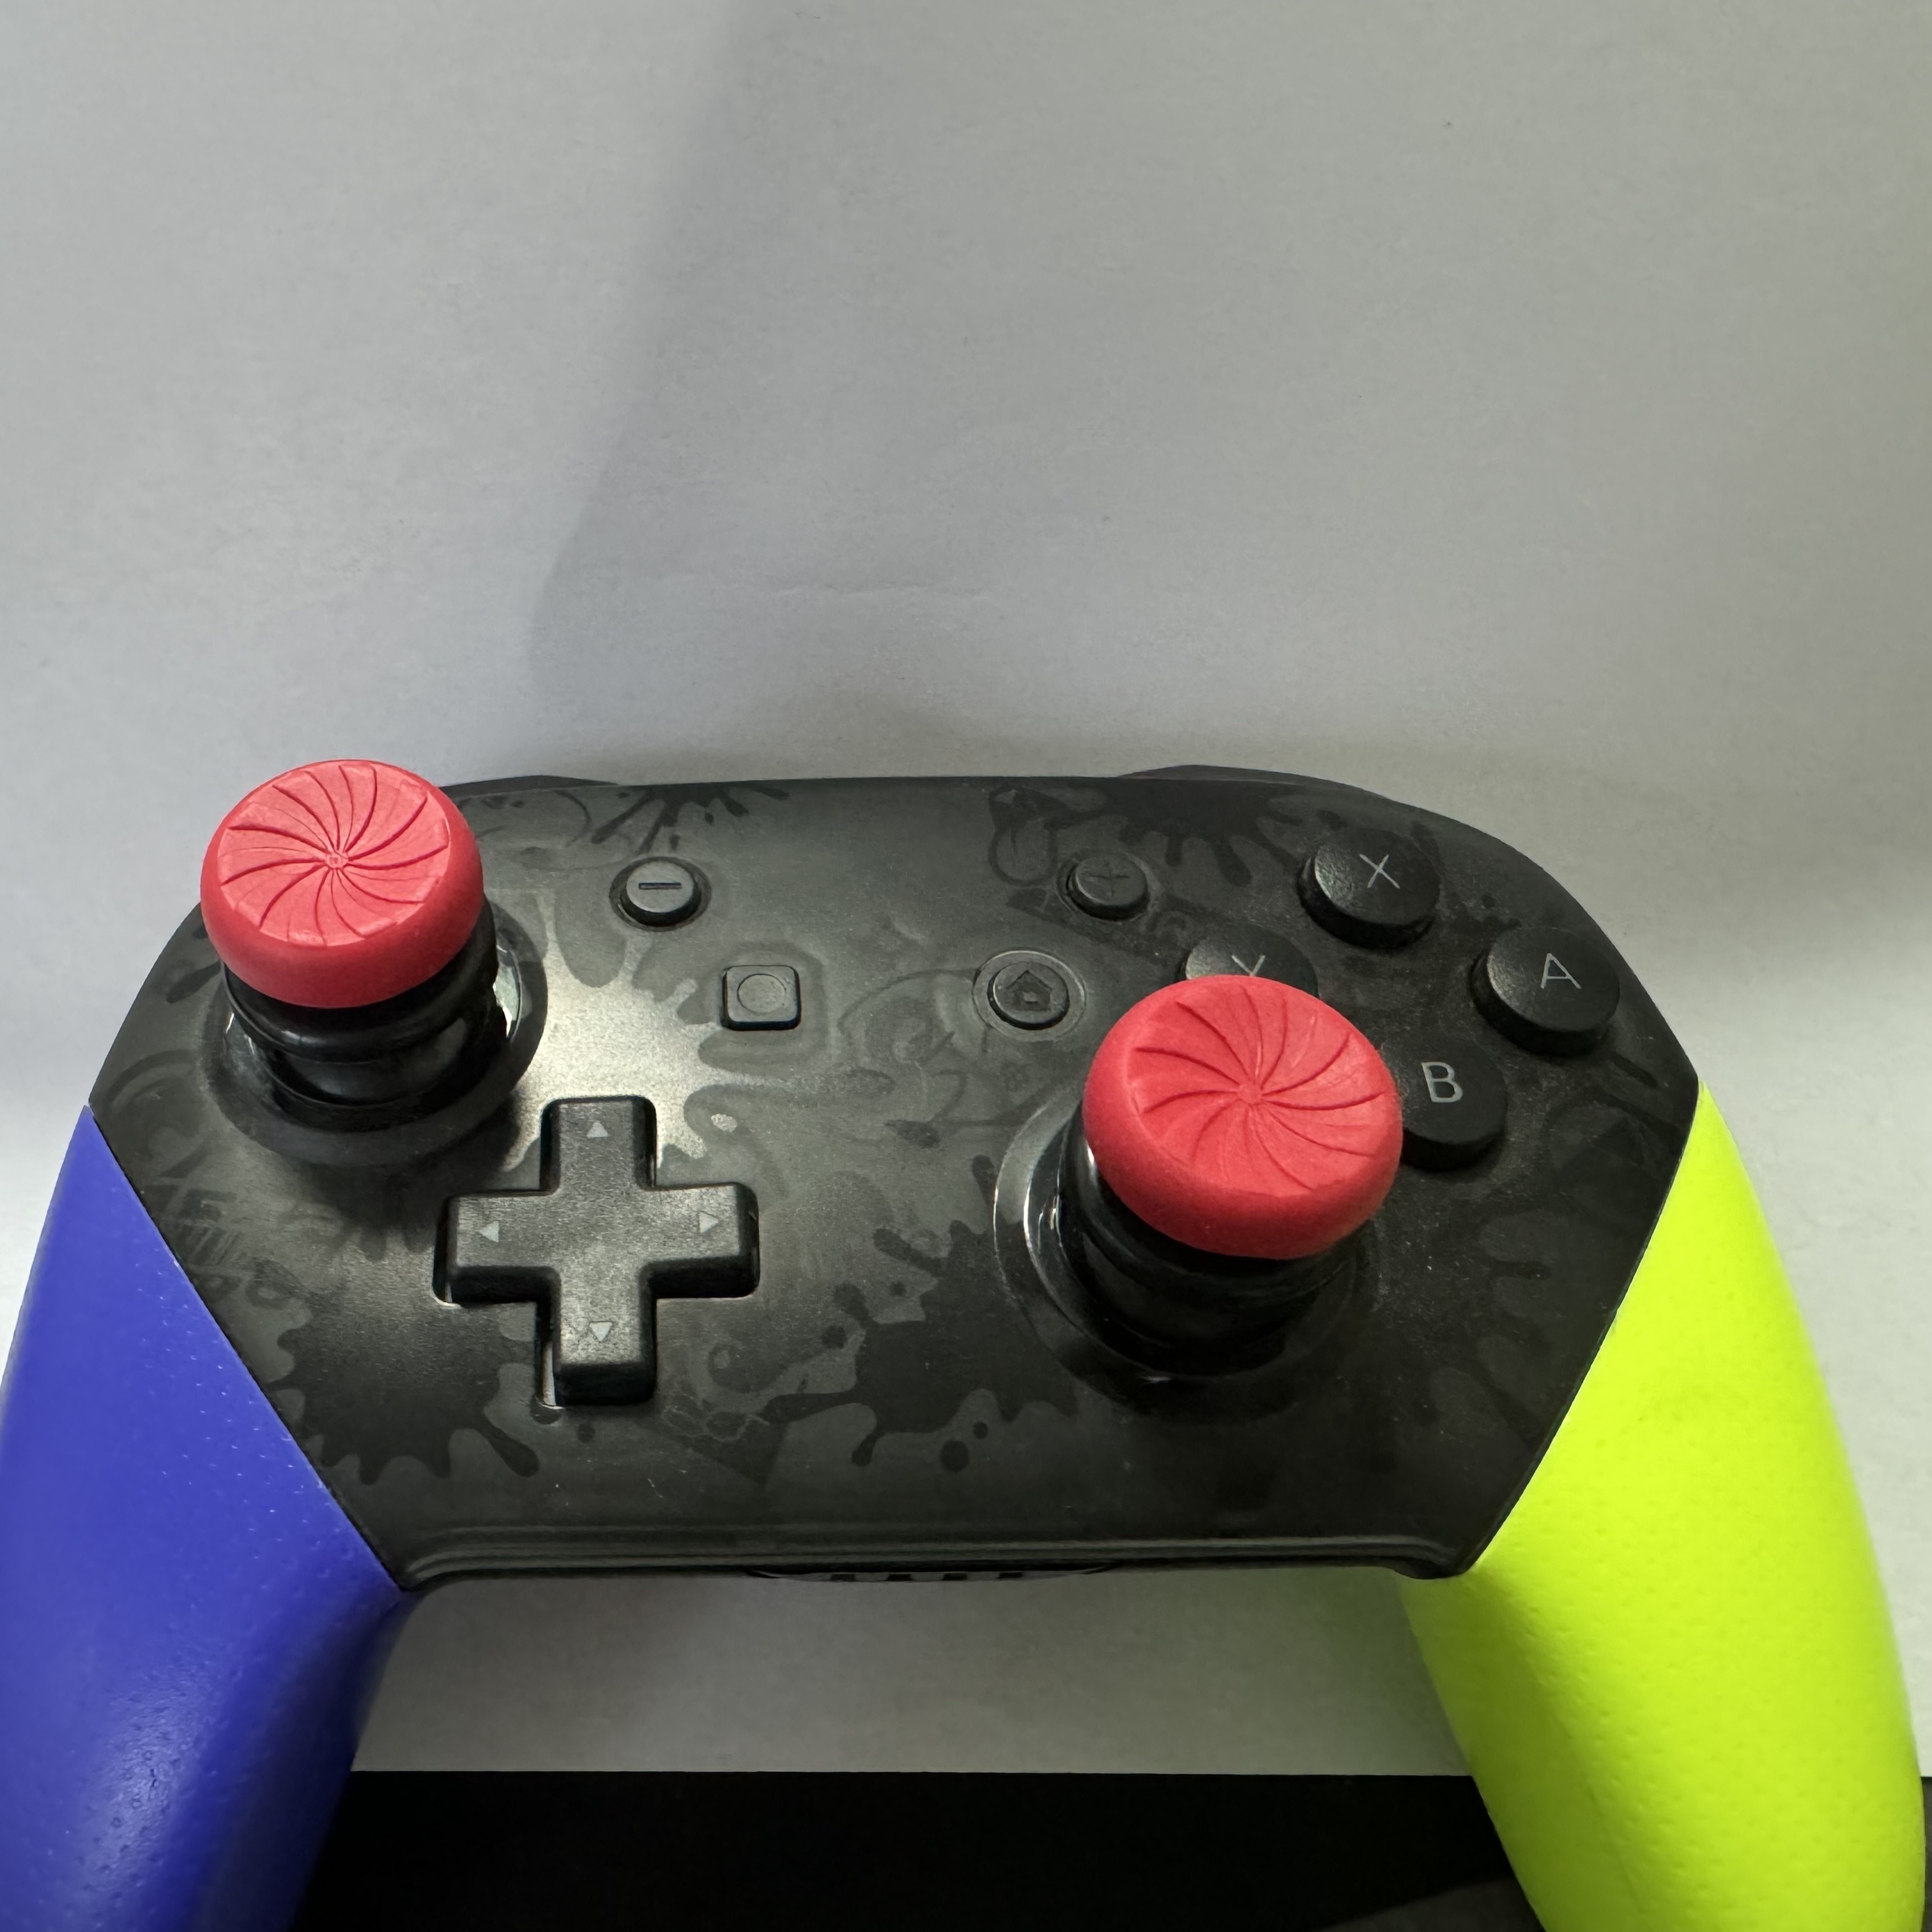 

Magicroc Thumb Grip Caps - 3d Heightened, Non-slip Joystick Covers For Enhanced Gaming Precision Thumb Grips For Controller Joystick Caps For Switches